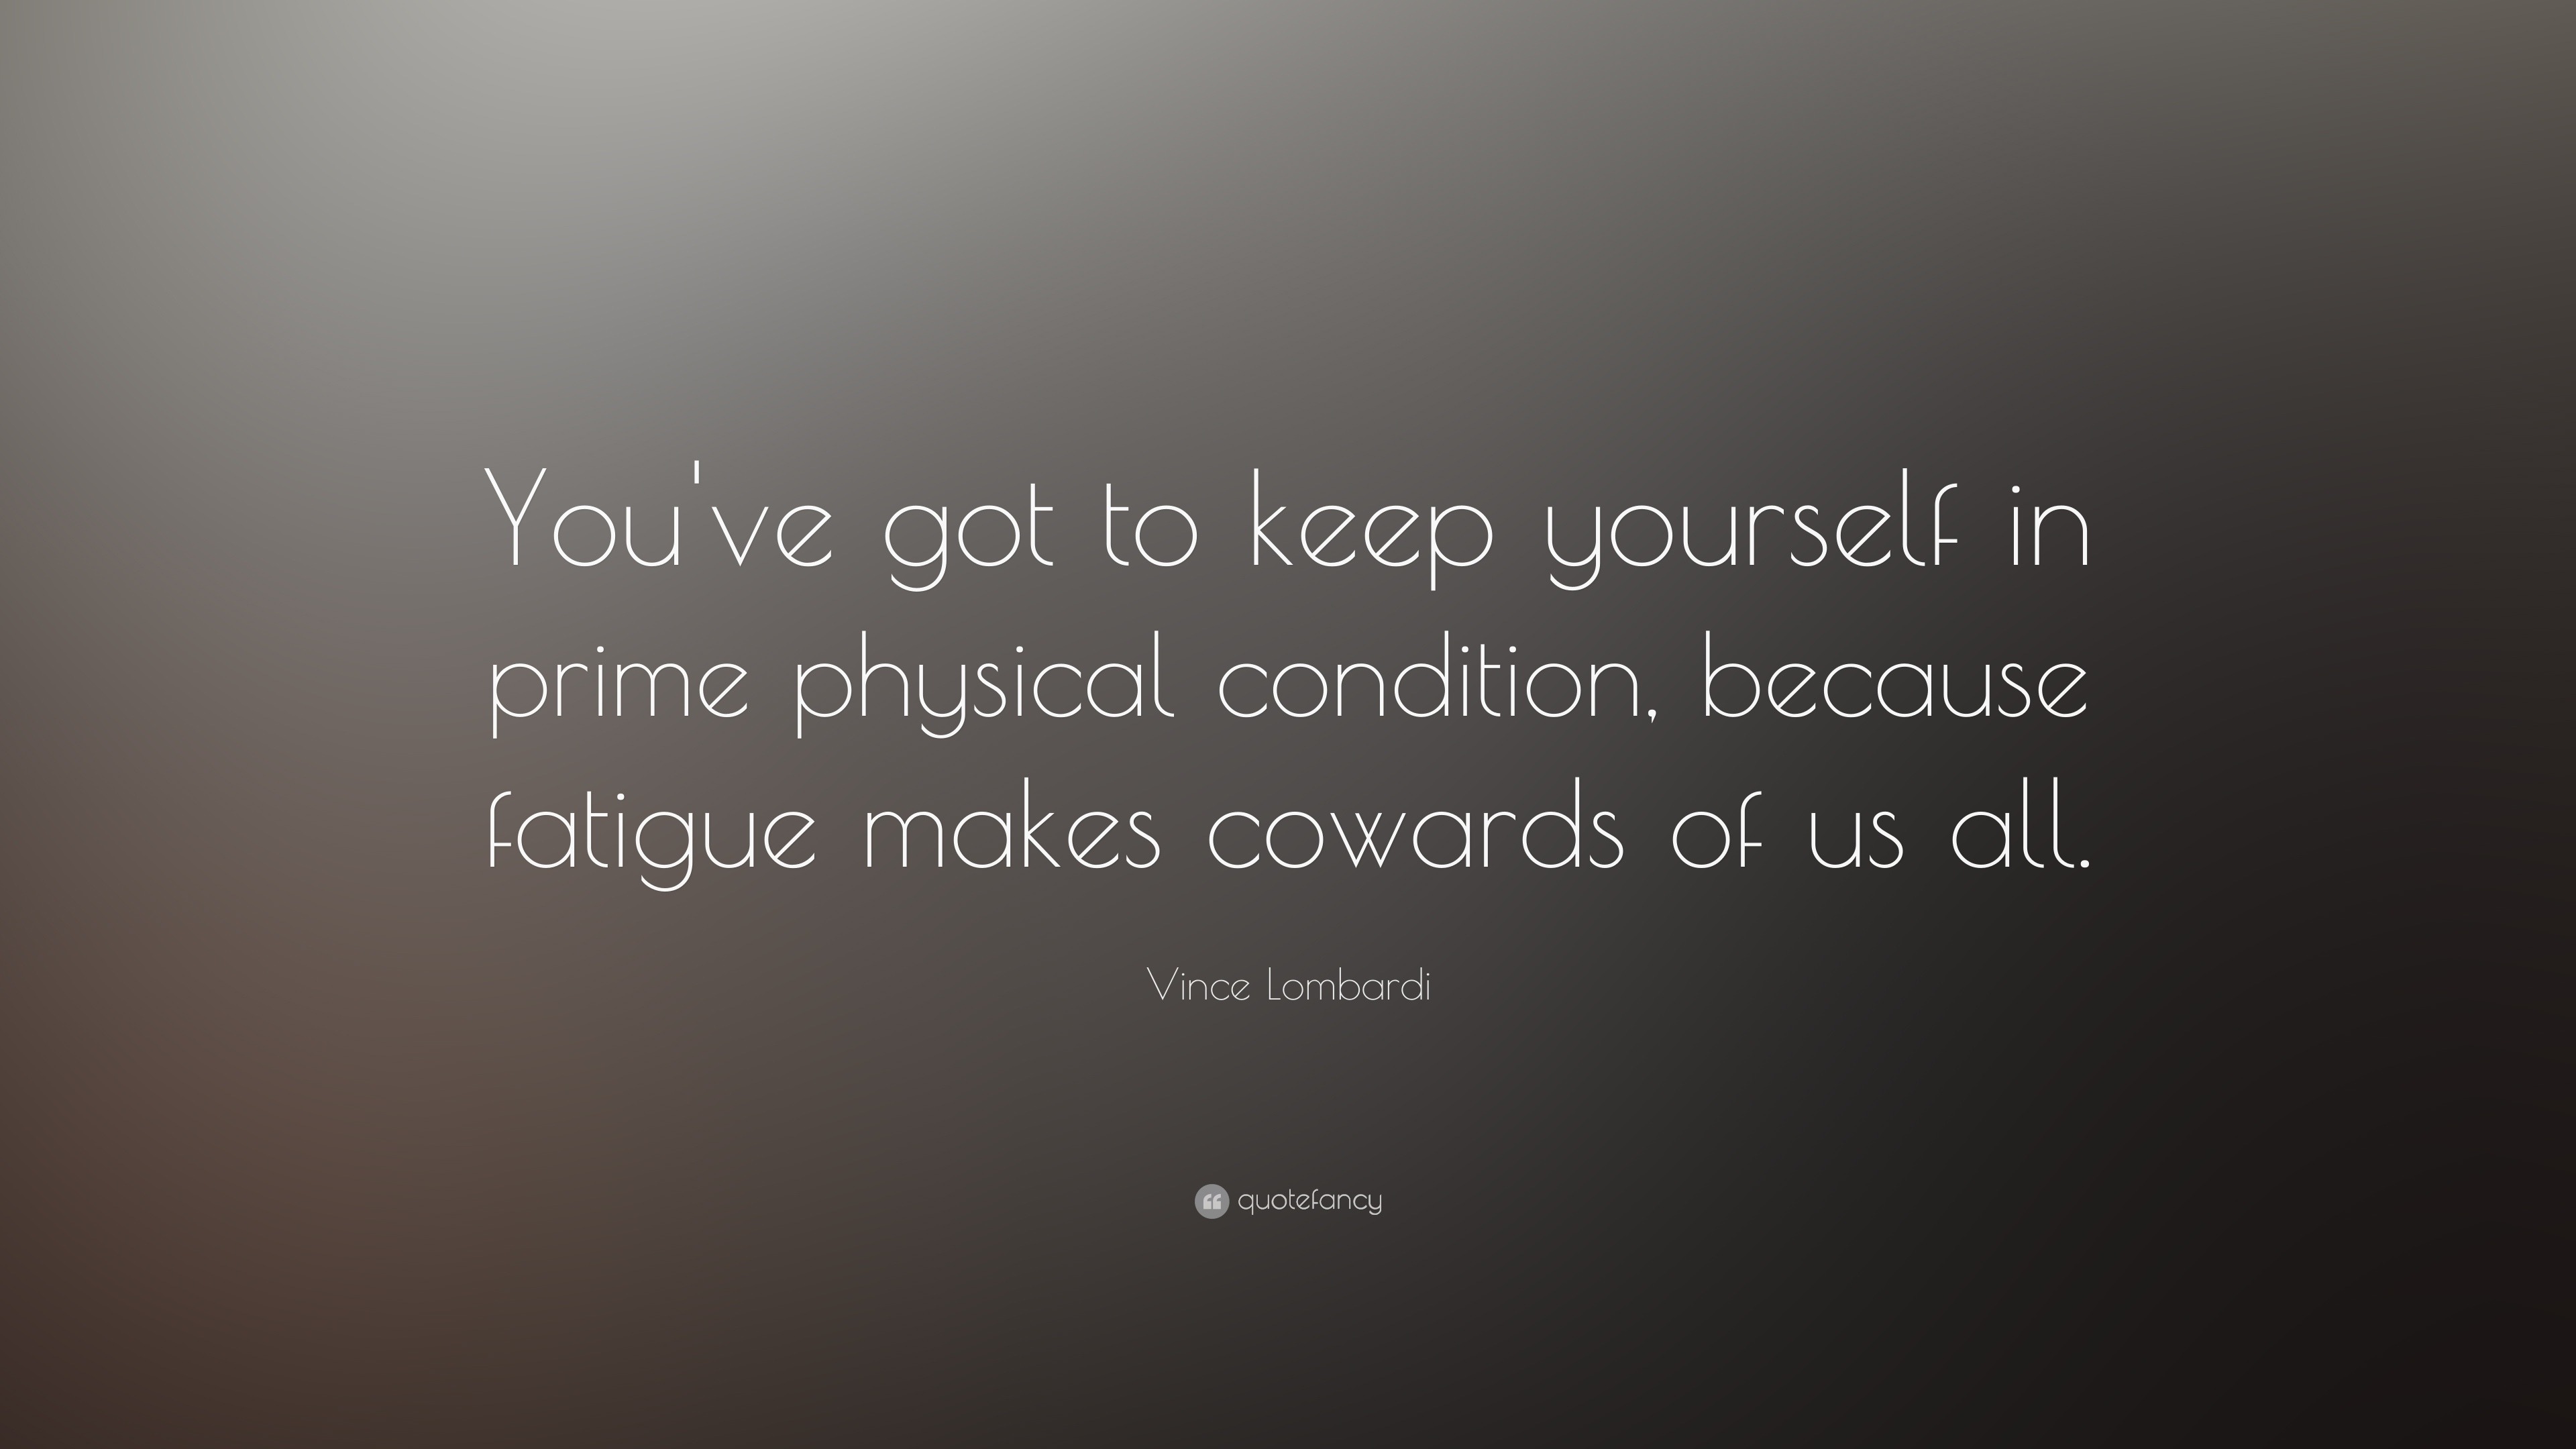 8265-Vince-Lombardi-Quote-You-ve-got-to-keep-yourself-in-prime-physical.jpg